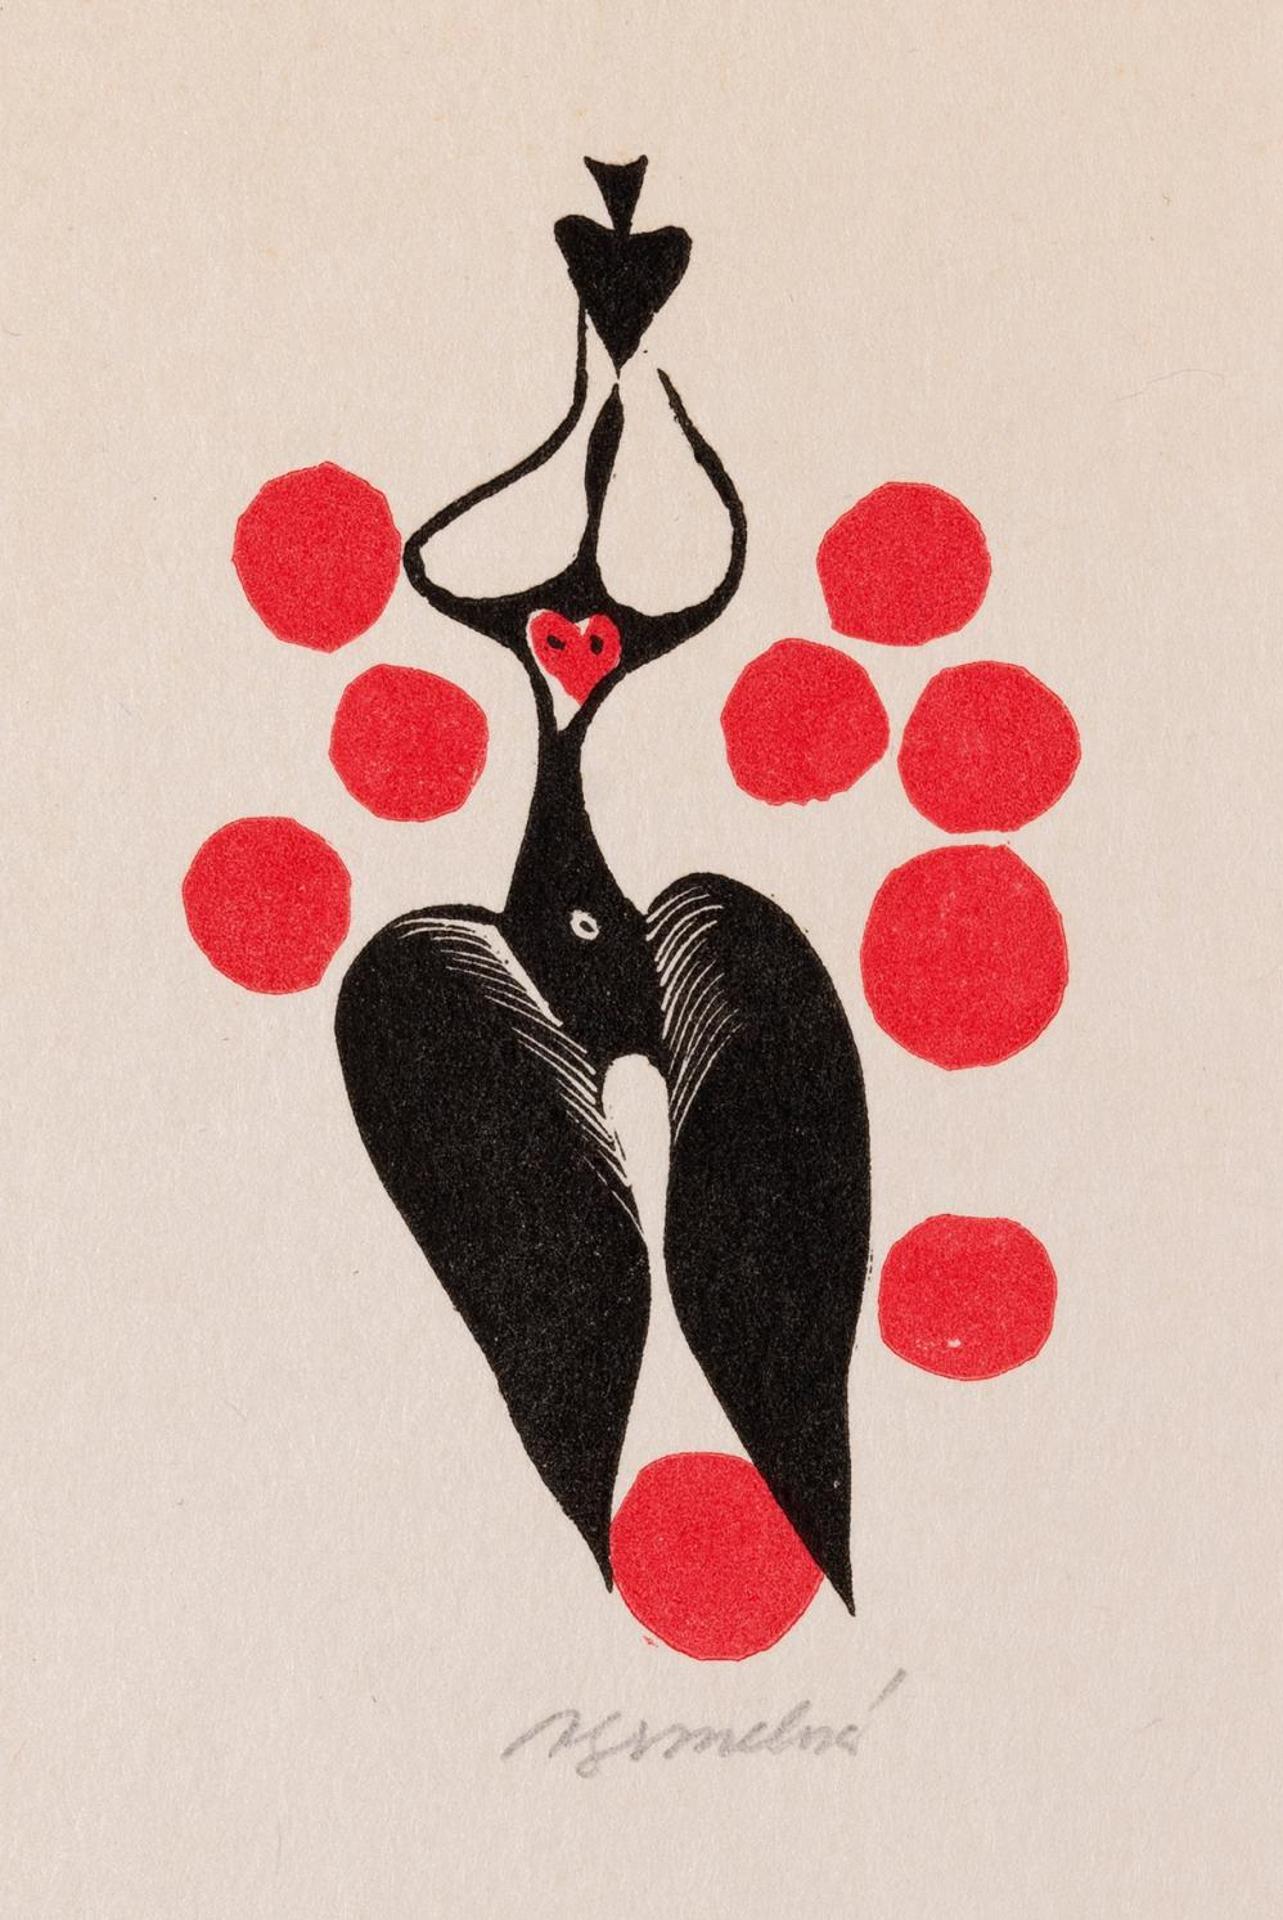 Anna Grmelova (1936) - Untitled - Nude with Red Heart